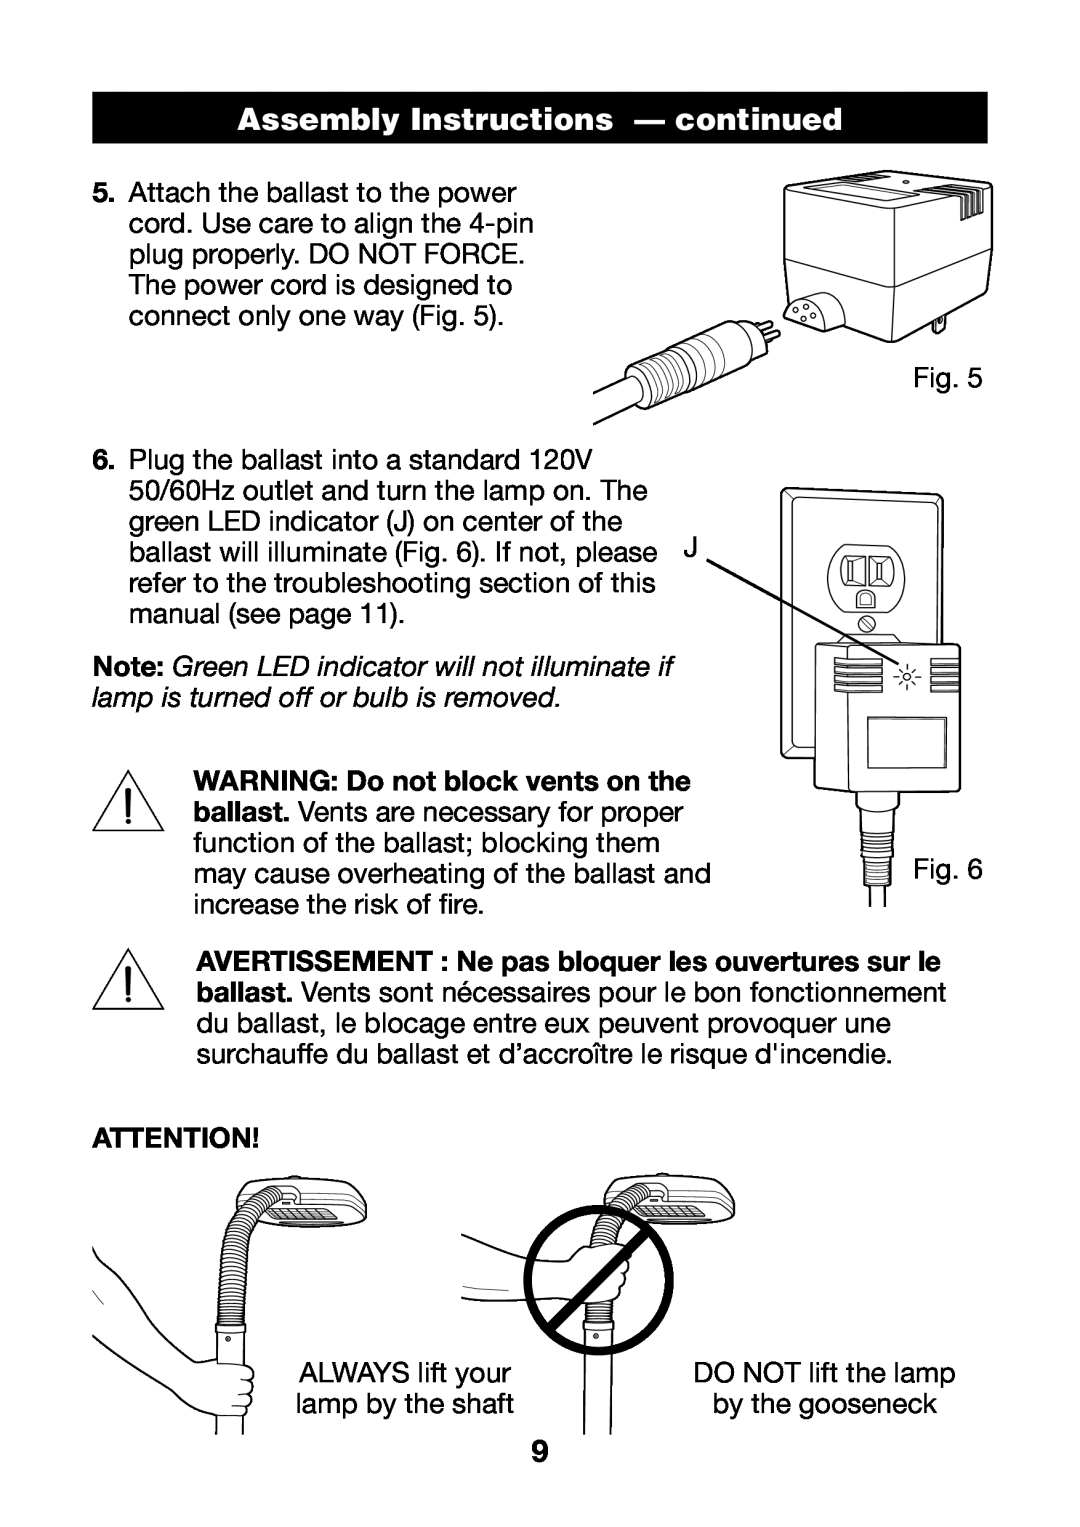 Verilux VF02 manual Assembly Instructions - continued, Plug the ballast into a standard 